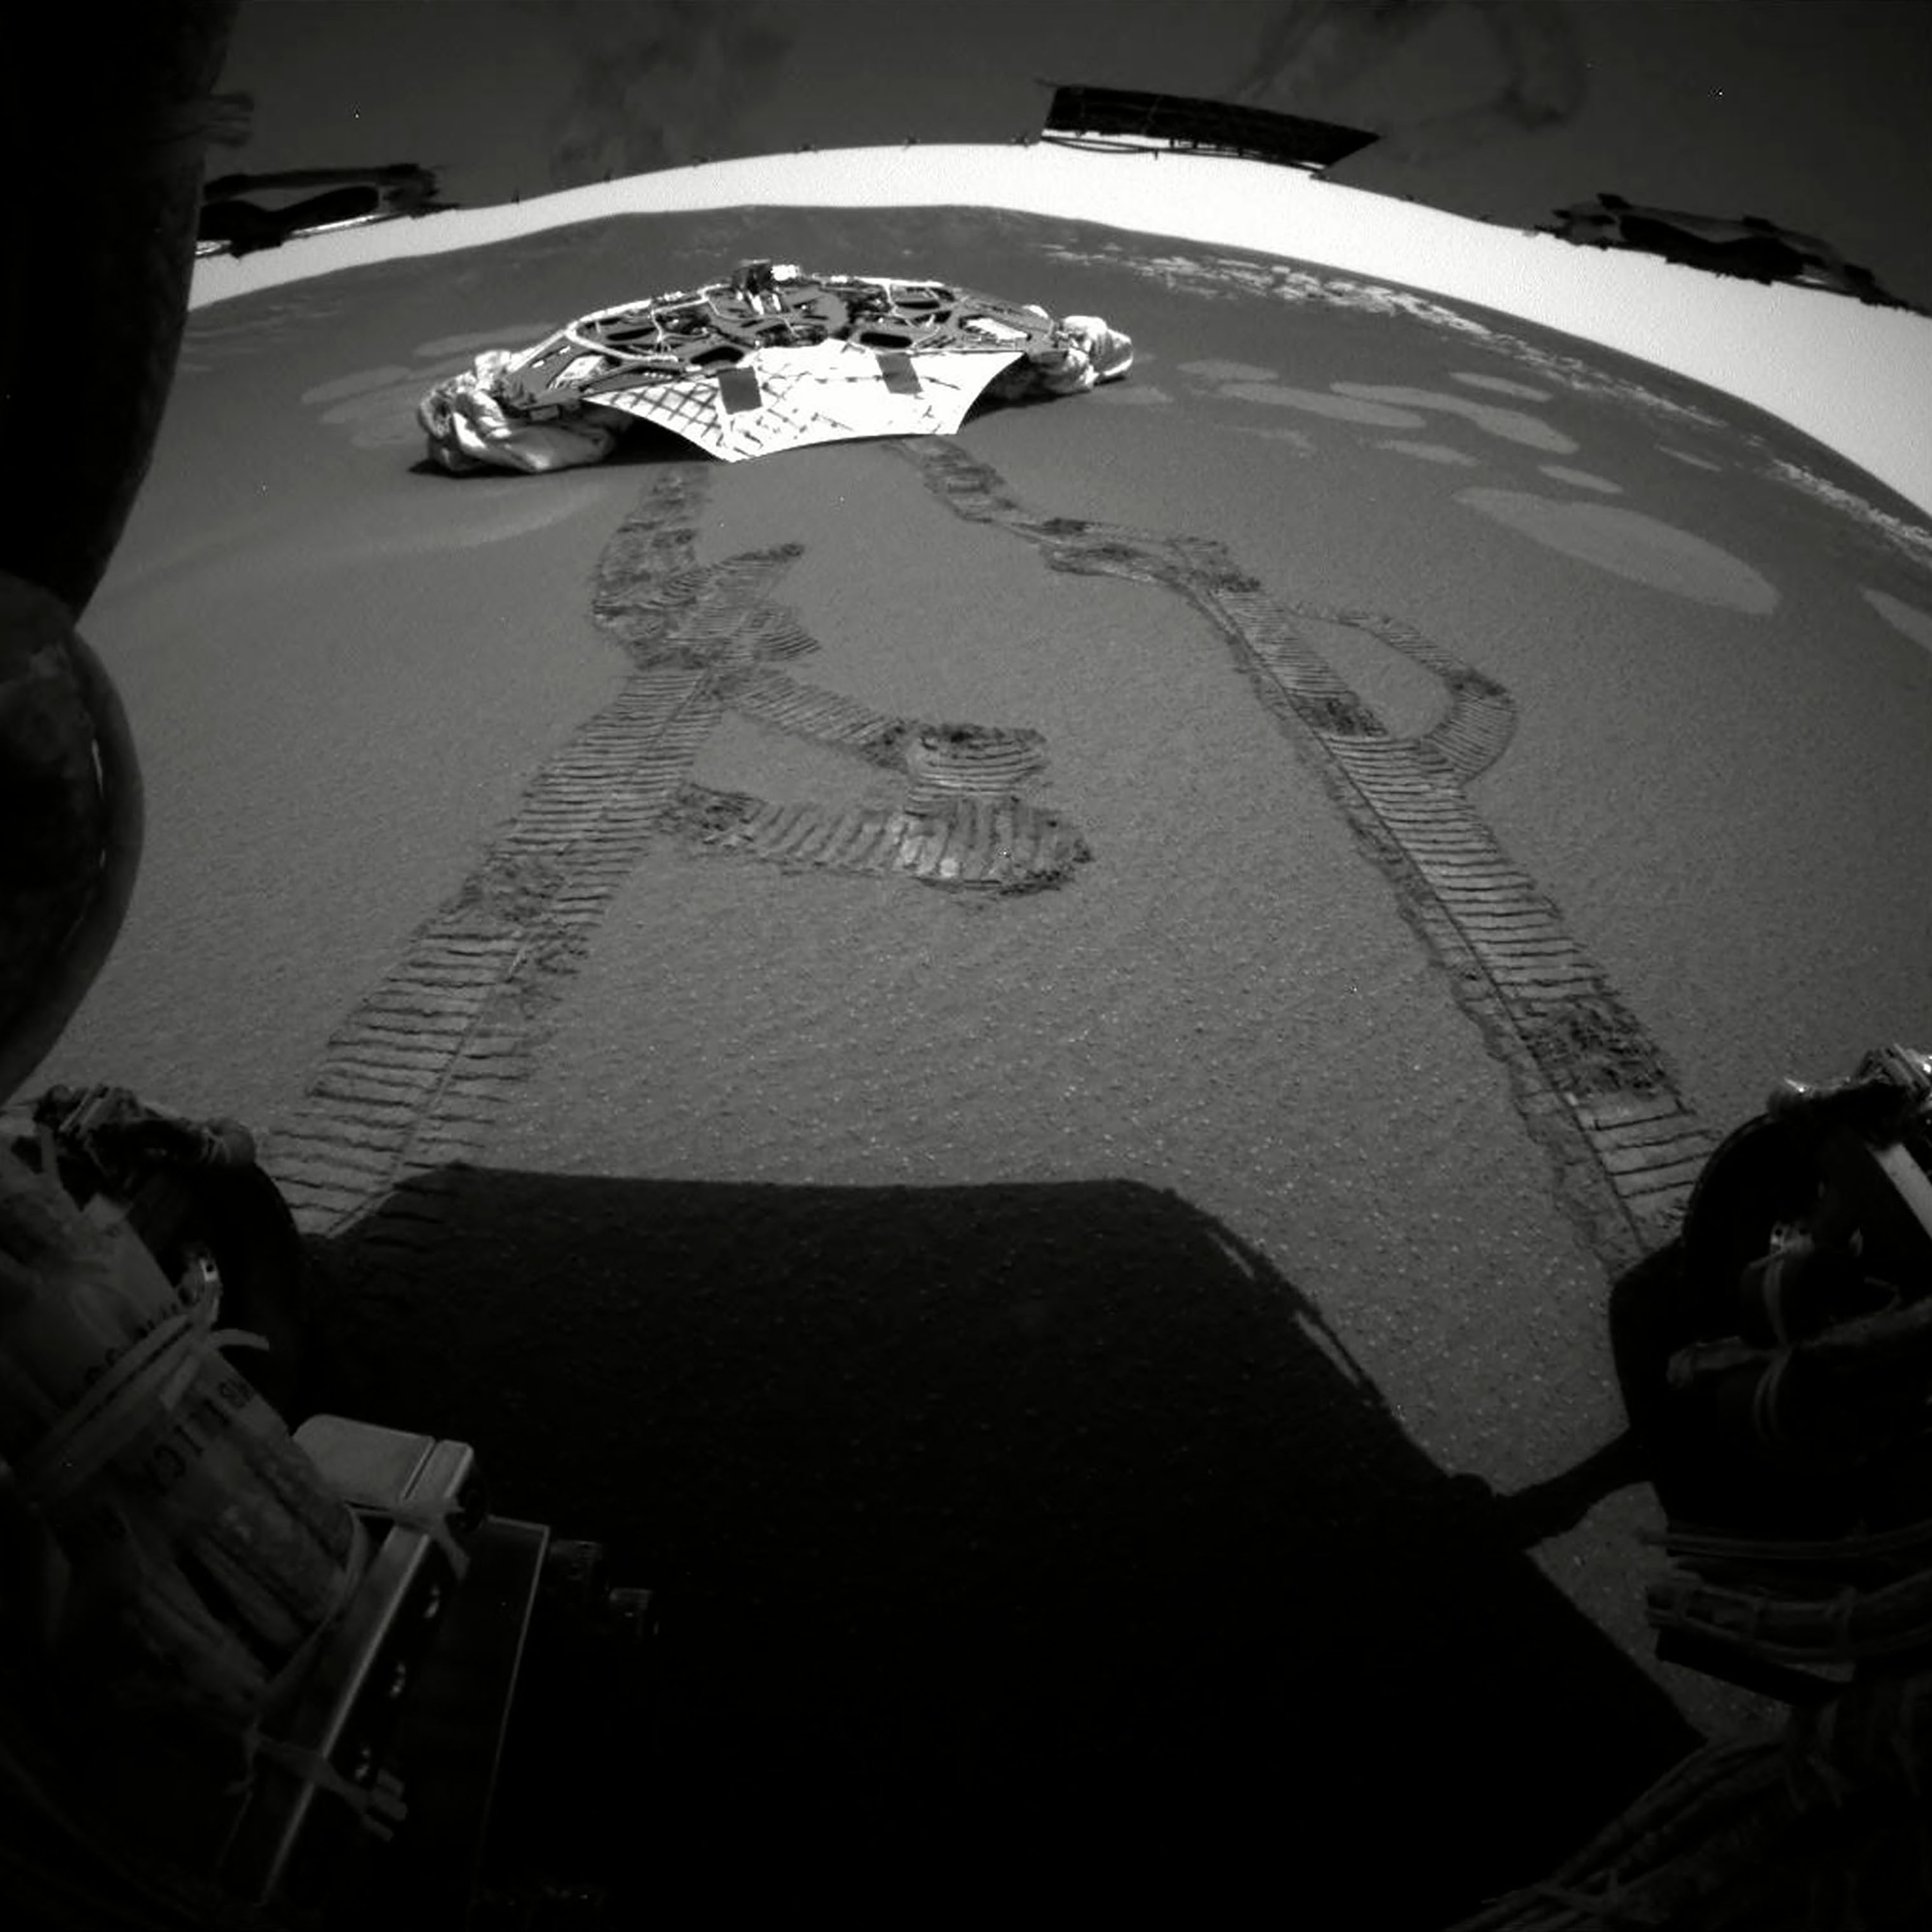 This photograph made by one of the rear hazard-avoidance cameras on Opportunity rover in February 2004 shows its landing platform, with freshly made tracks leading away from it. (AP/Shutterstock)